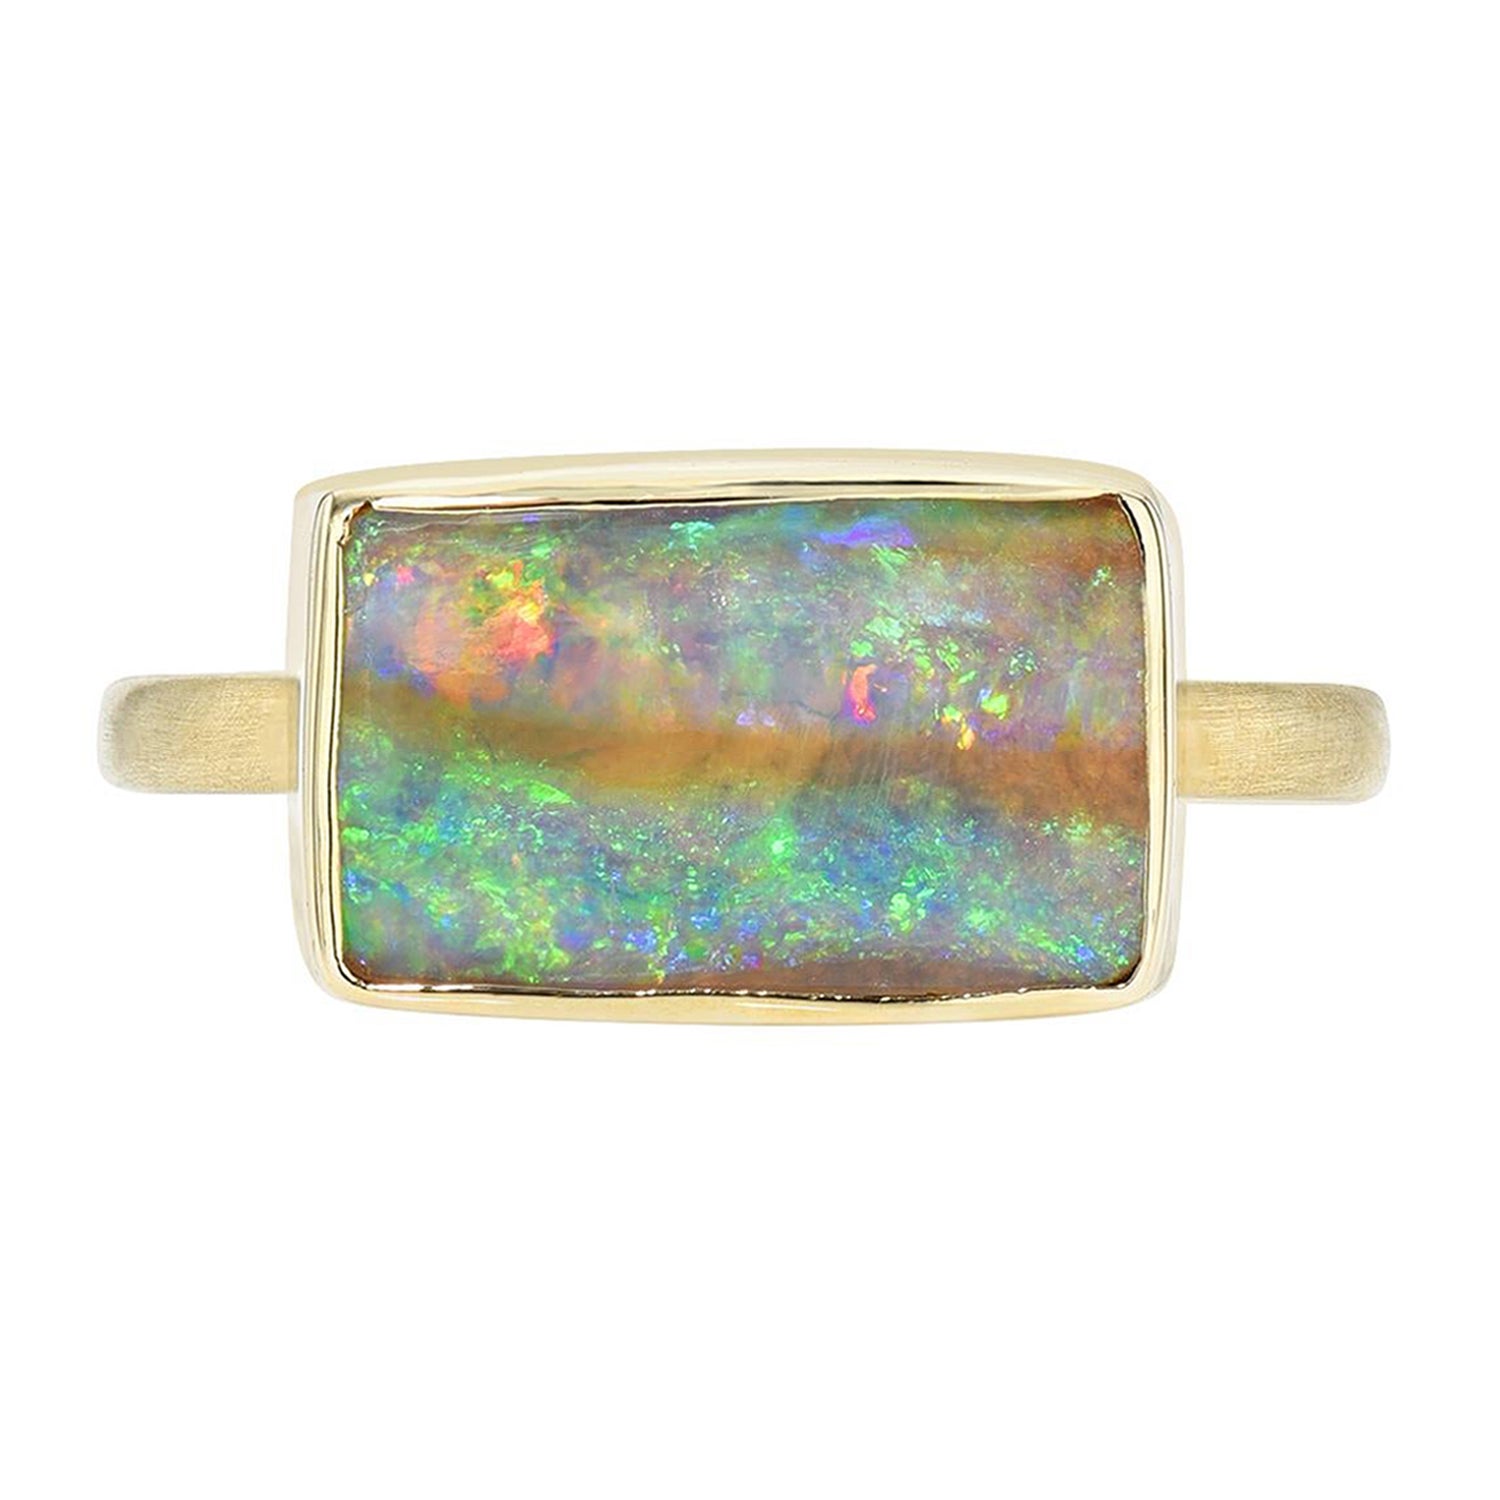 View from a Rainbow Australian Opal Ring in 14k Gold by NIXIN Jewelry